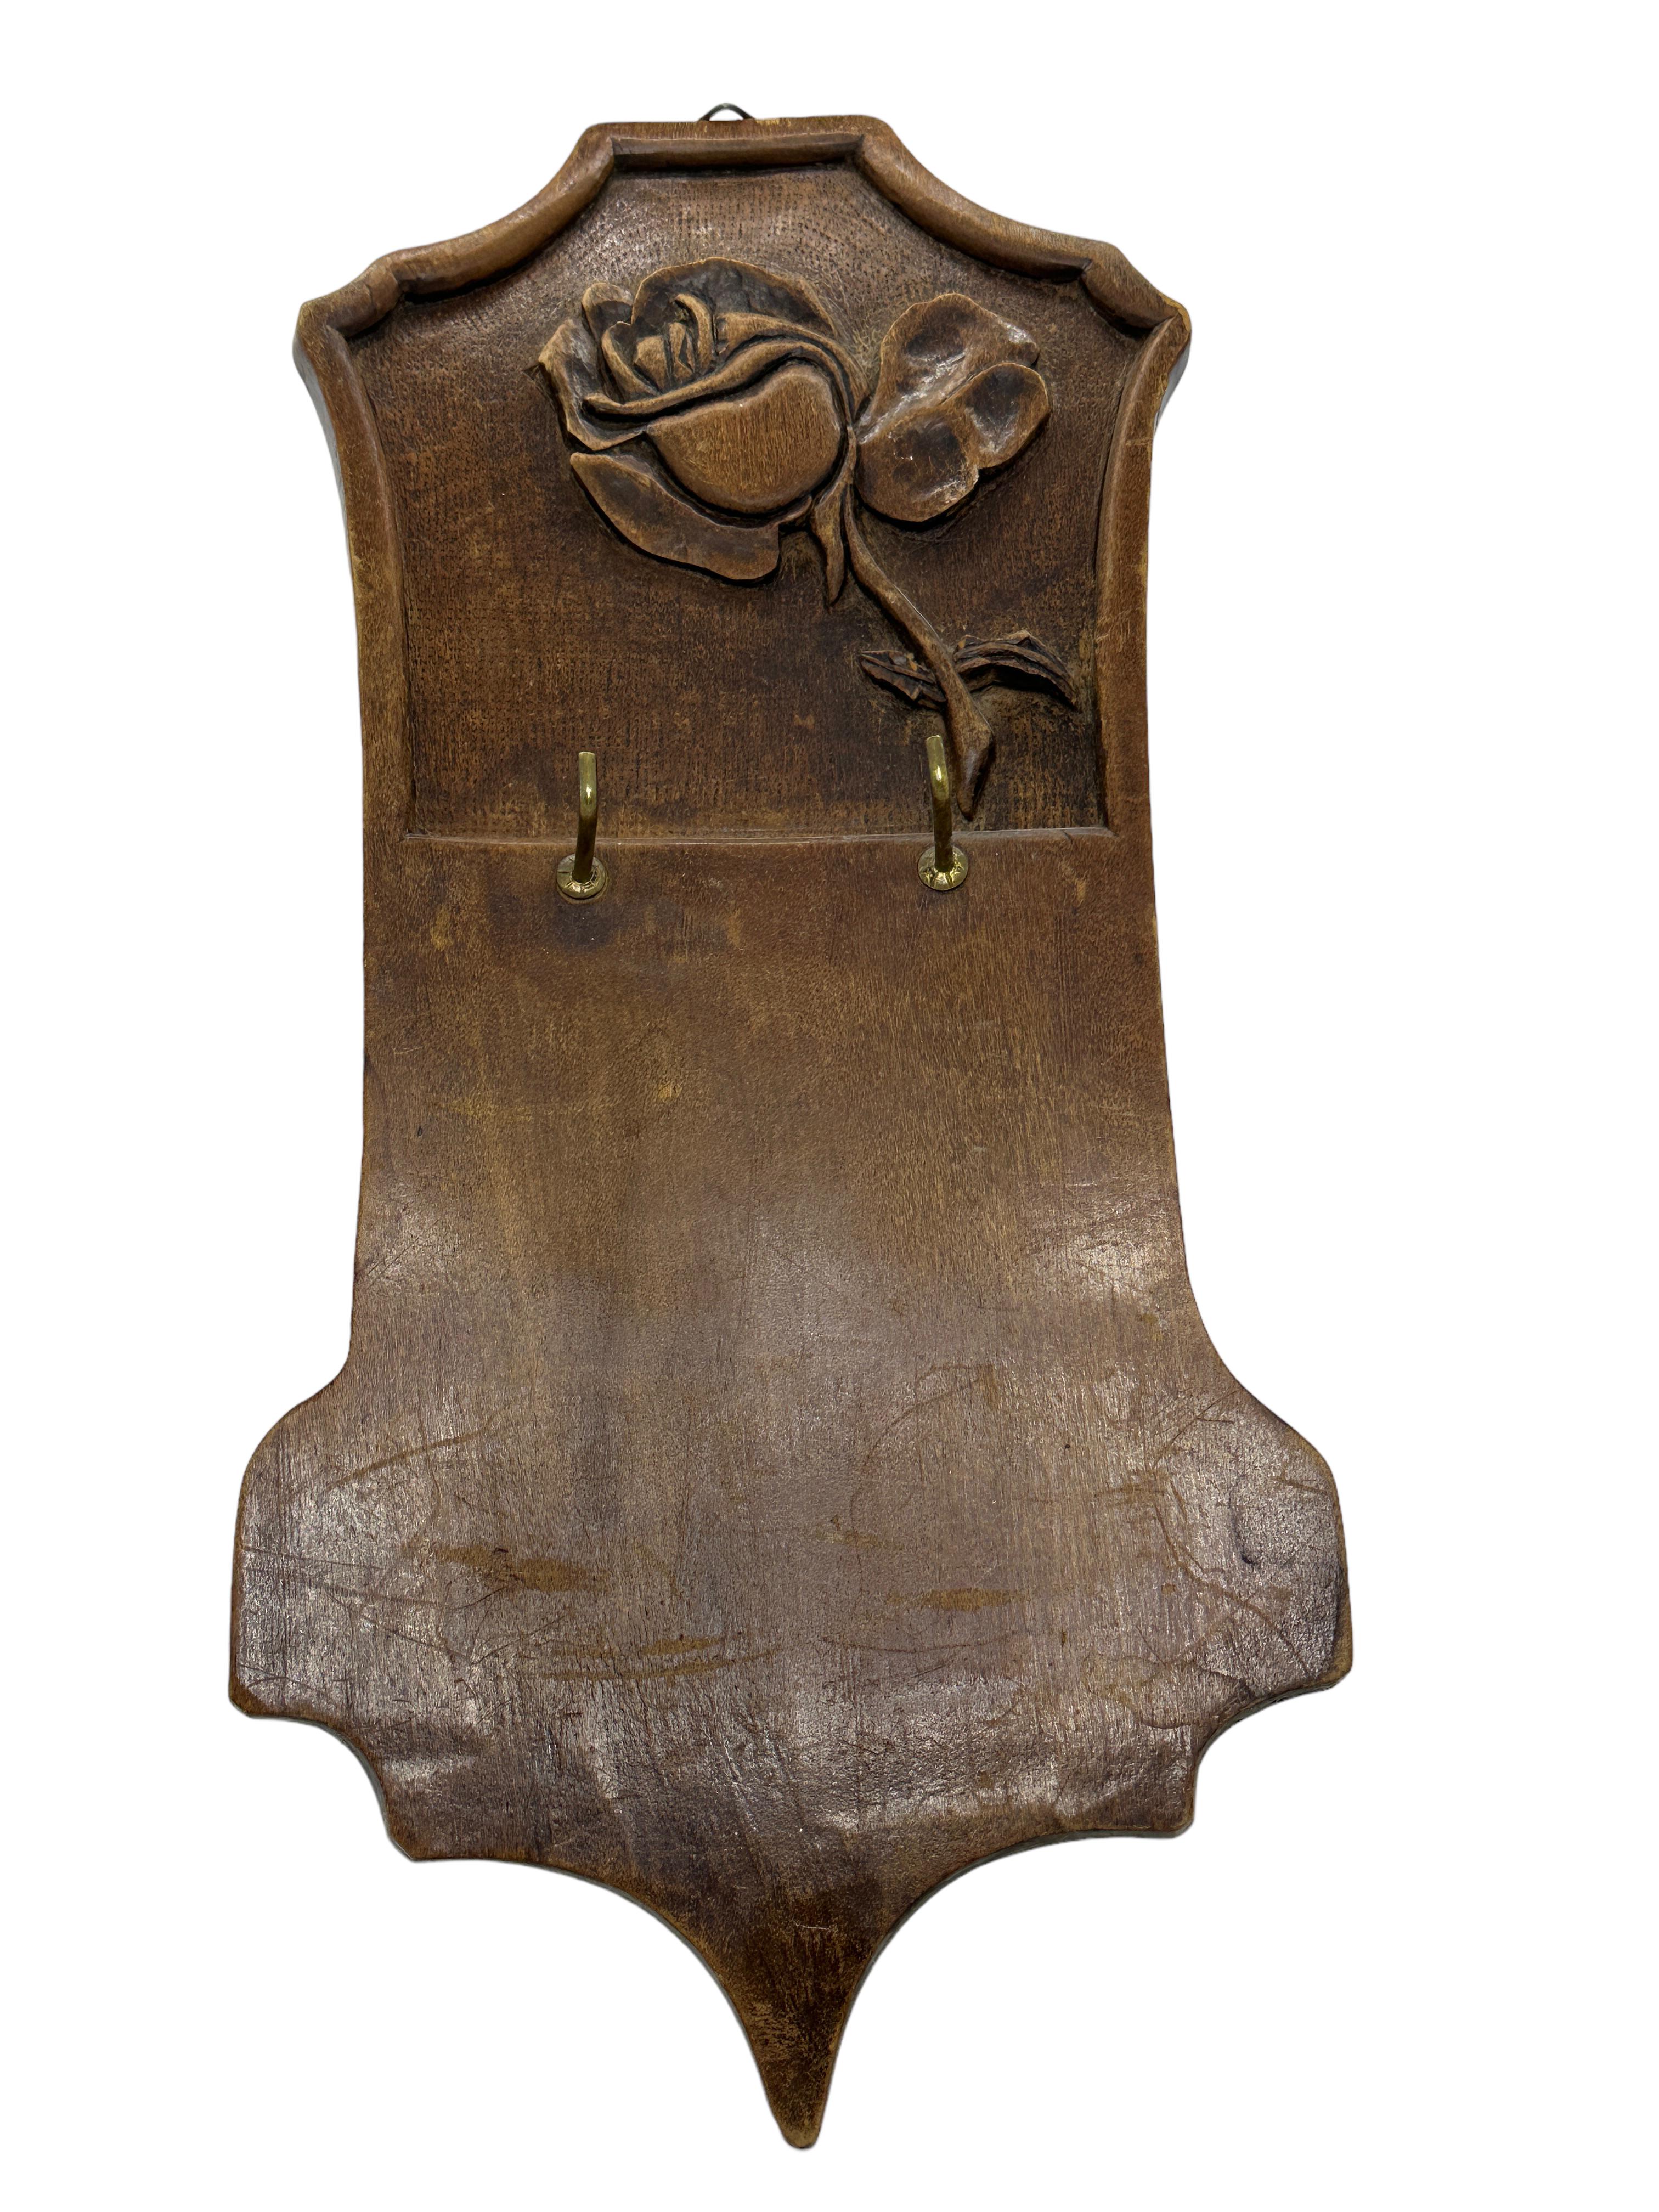 A lovely key hanger board made of hand carved wood, made probably in the black forest area in Germany. Found at an estate sale in Nuremberg, Germany. It is not marked. A nice addition to your collection. It is in very good as found condition. Metal